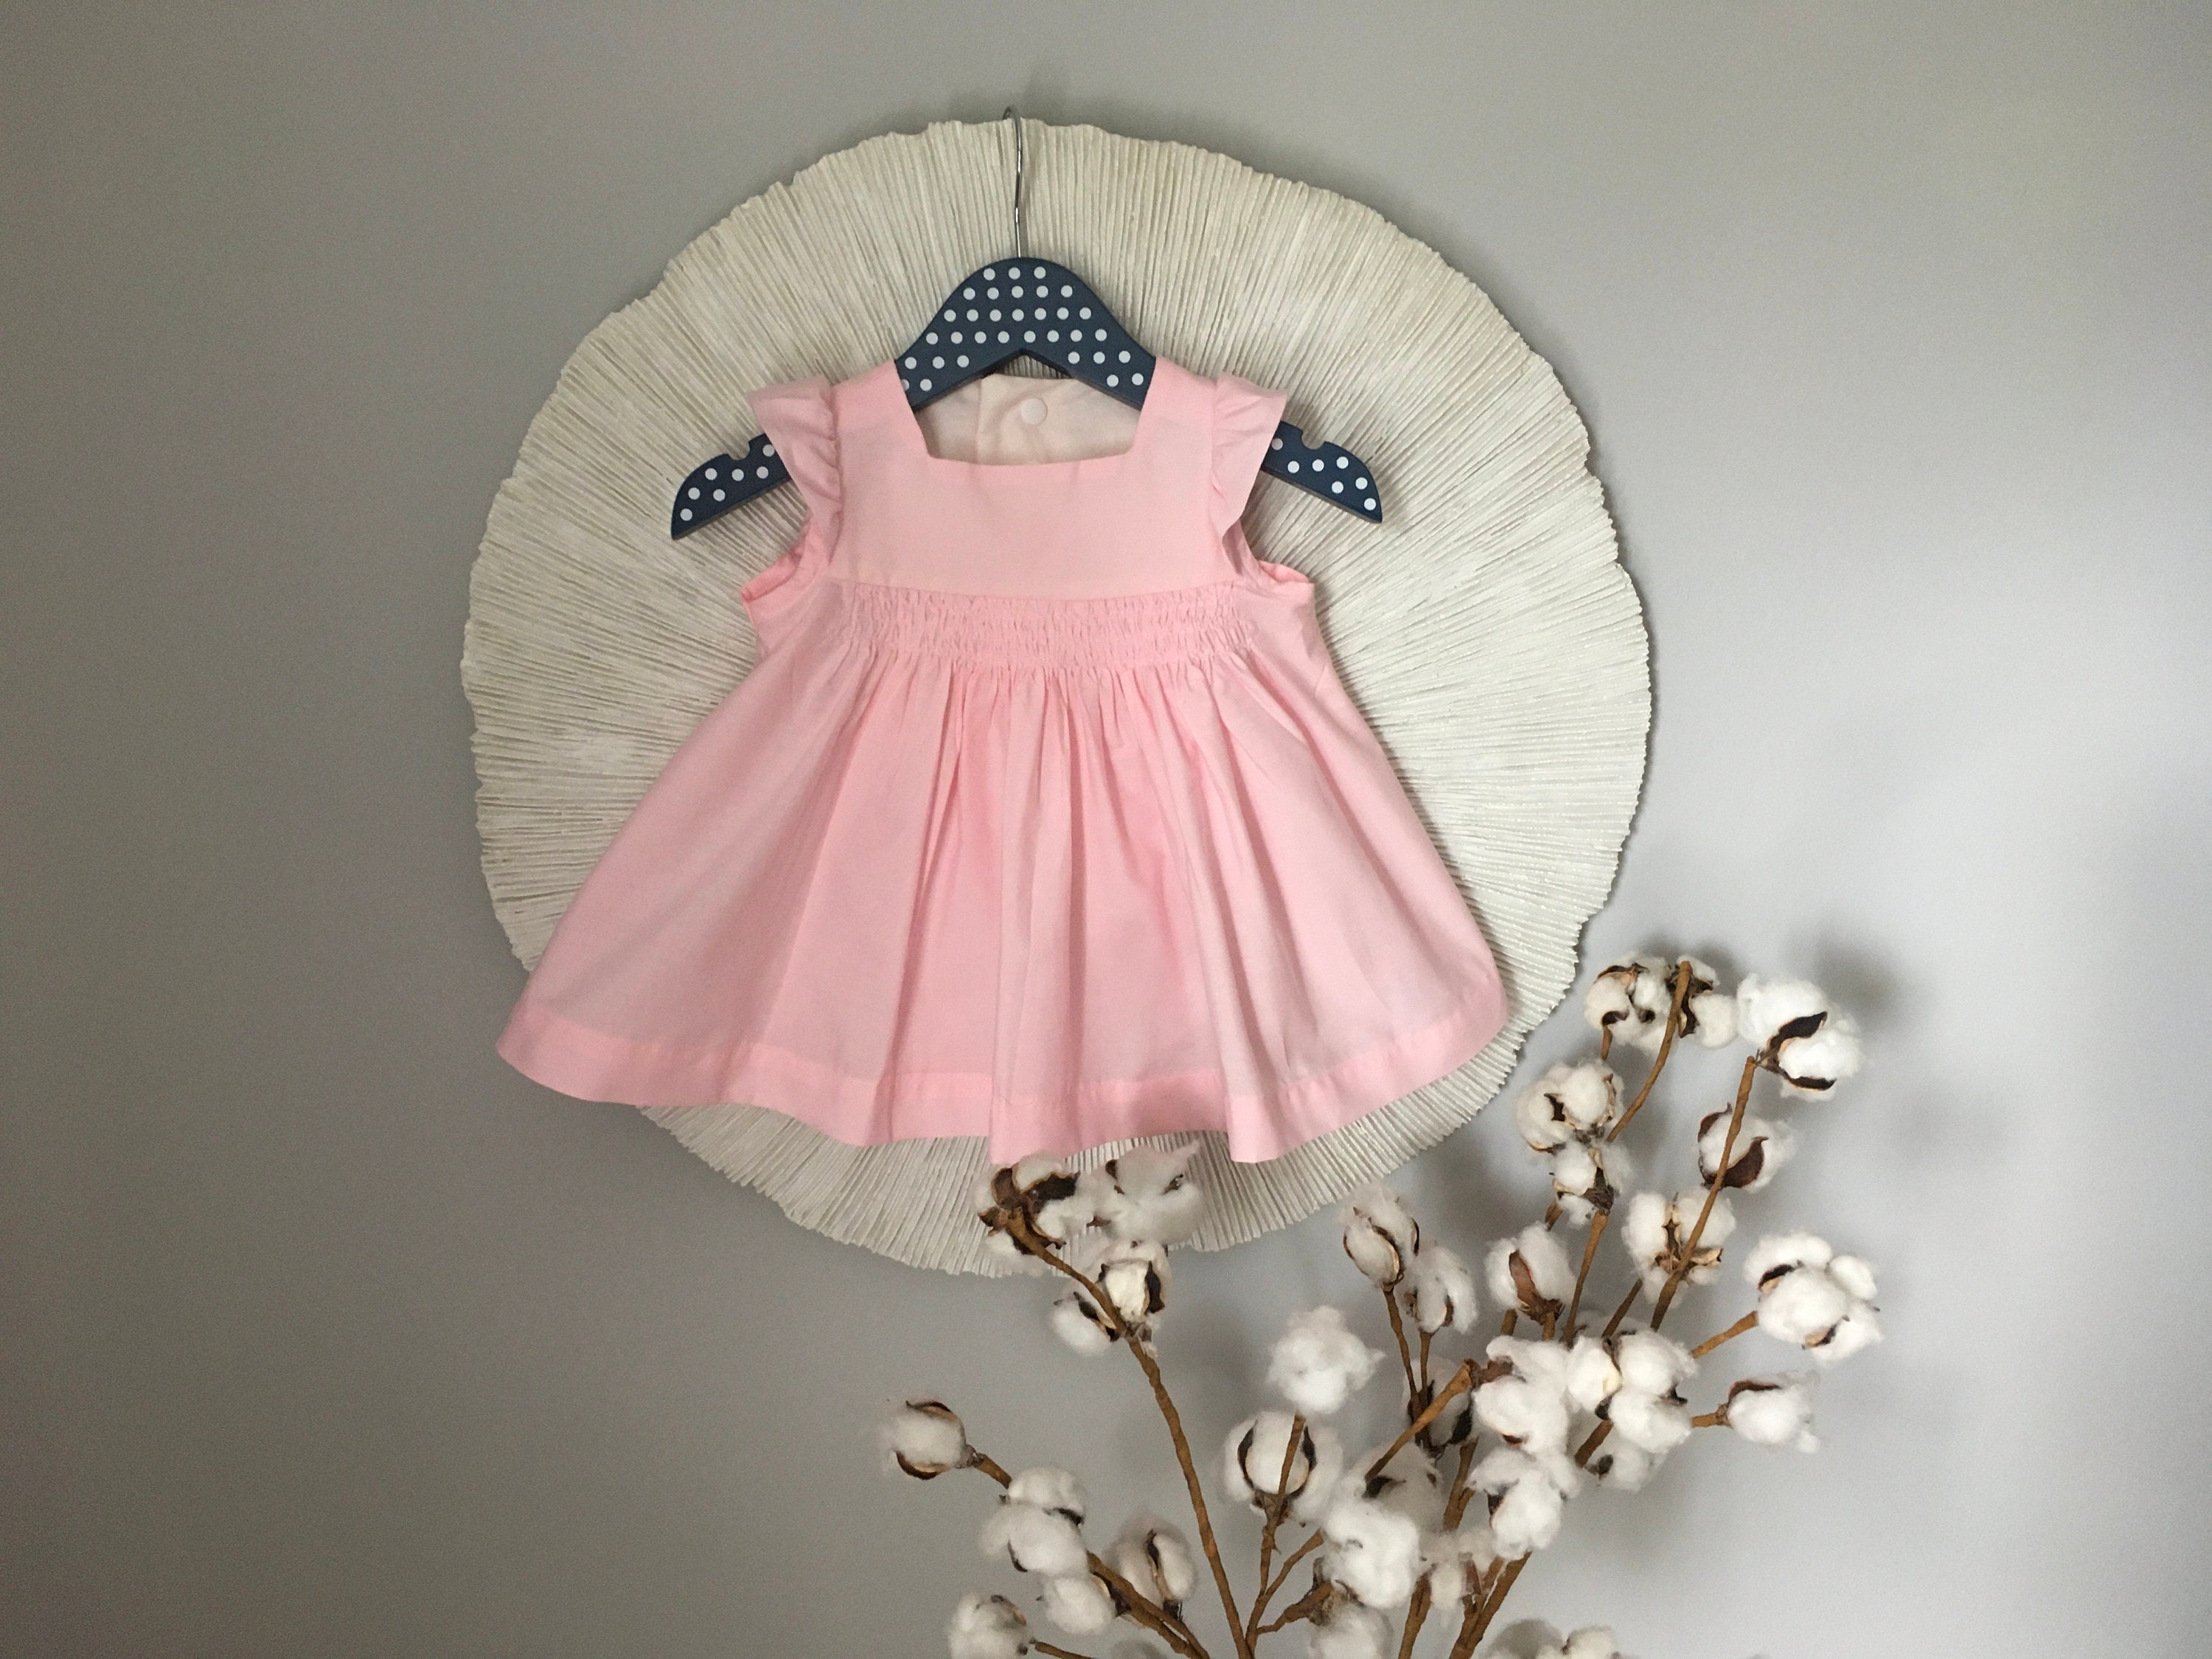 Handmade Cotton Dress Baby Girl 0-3 Mts With Smocking Detail 